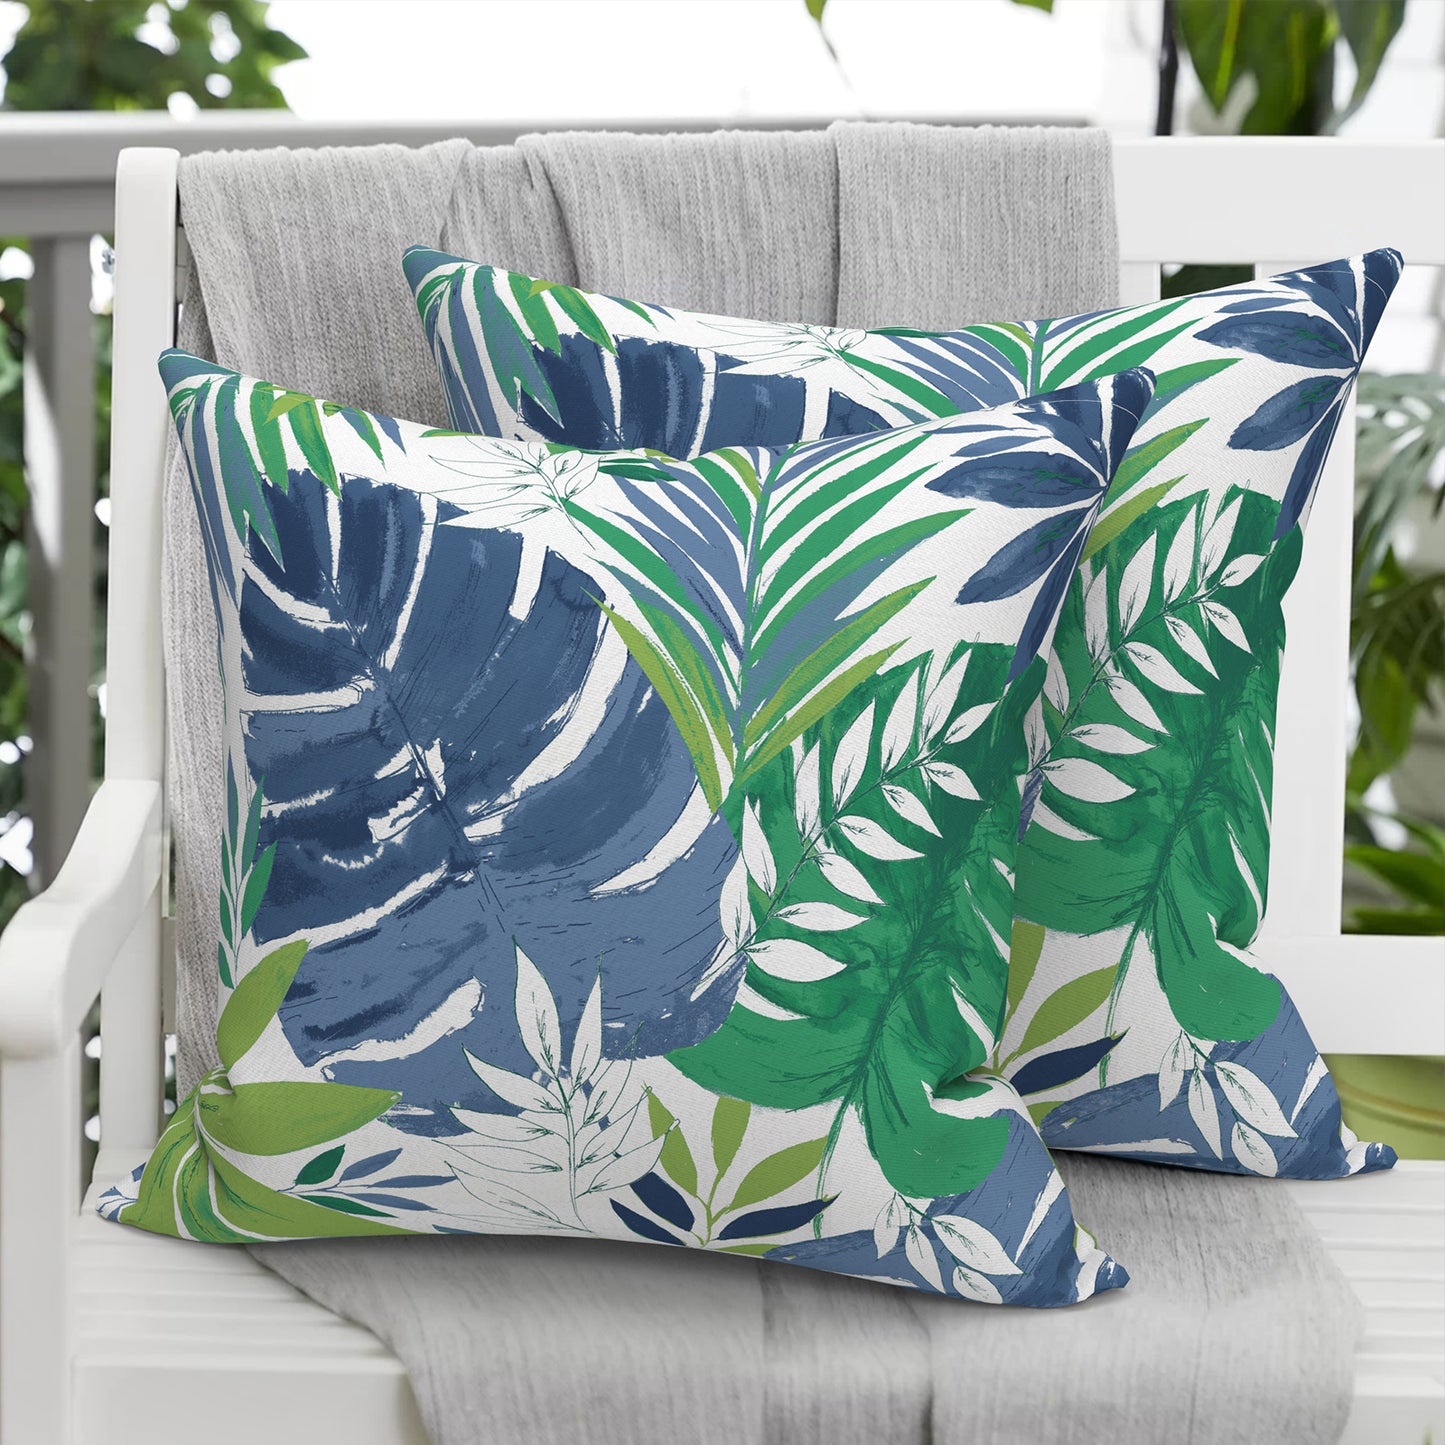 Melody Elephant Pack of 2 Patio Throw Pillow Covers ONLY, Water Repellent Cushion Cases 20x20 Inch, Square Pillowcases for Outdoor Couch Decoration, Islamorada Blue Green